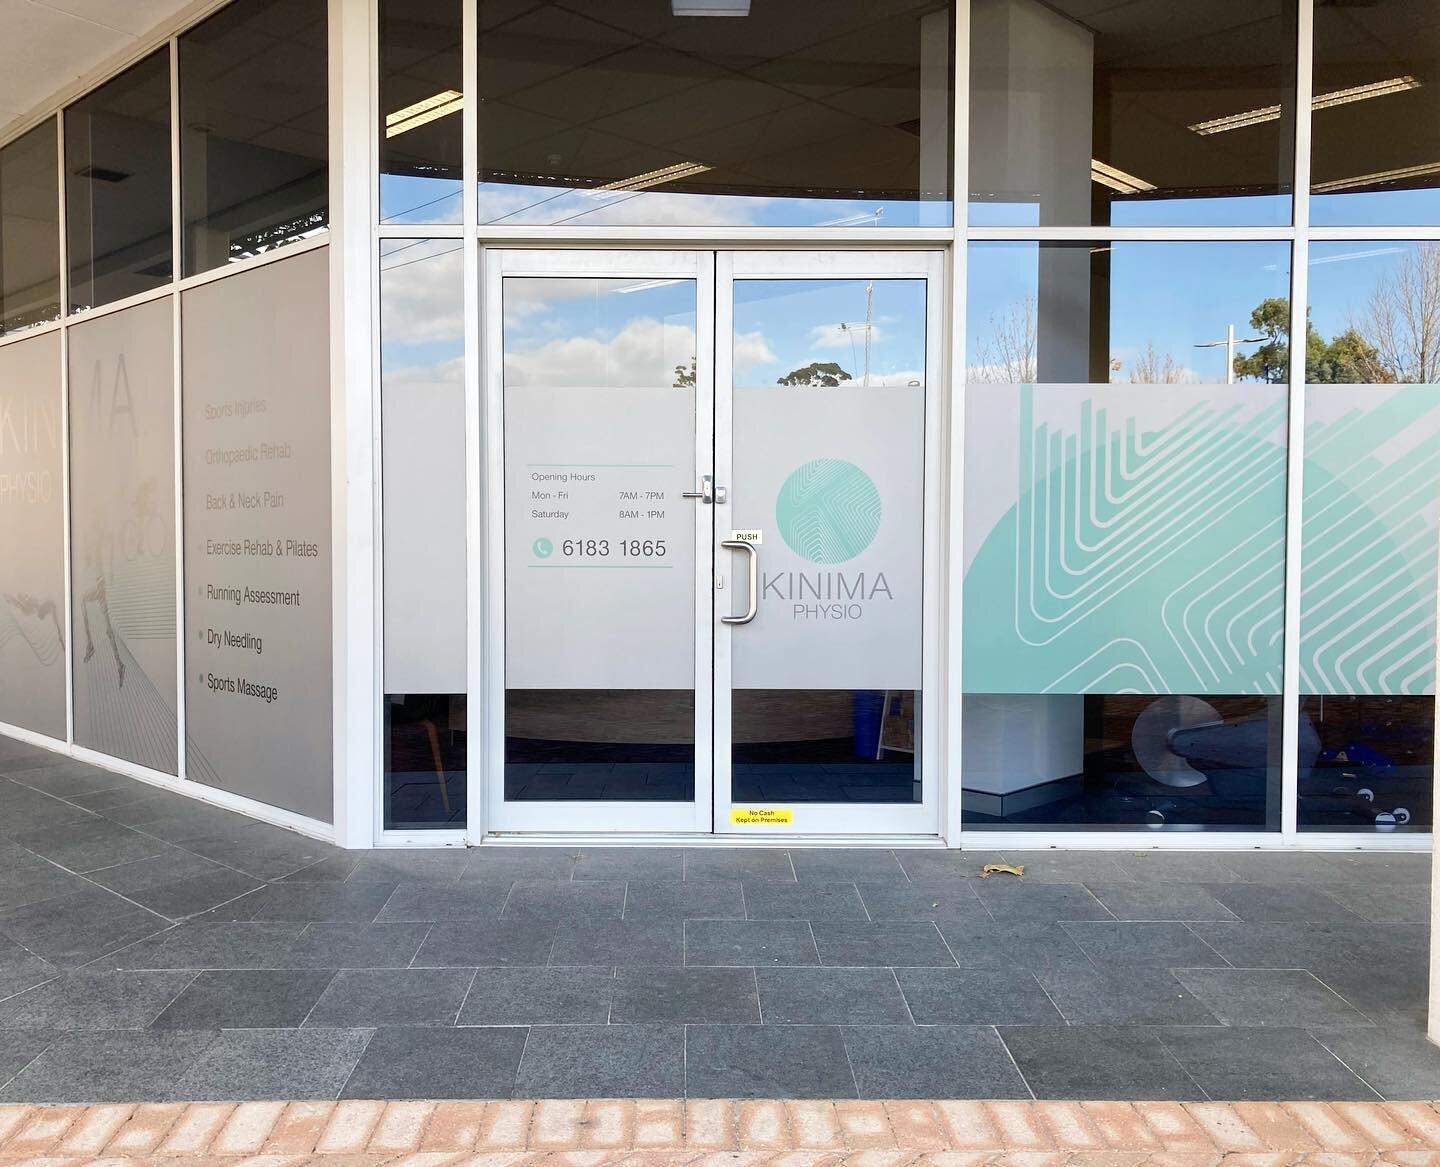 𝗪𝐄𝐋𝐂𝐎𝐌𝐄 😃⁣
⁣
We&rsquo;ve 𝐋𝐎𝐕𝐄𝐃 being back in the clinic this week after the Perth lockdown!⁣
⁣
It&rsquo;s been great getting back to helping our clients live their active &amp; meaningful lives.⁣
⁣
Need some help with getting back on tra